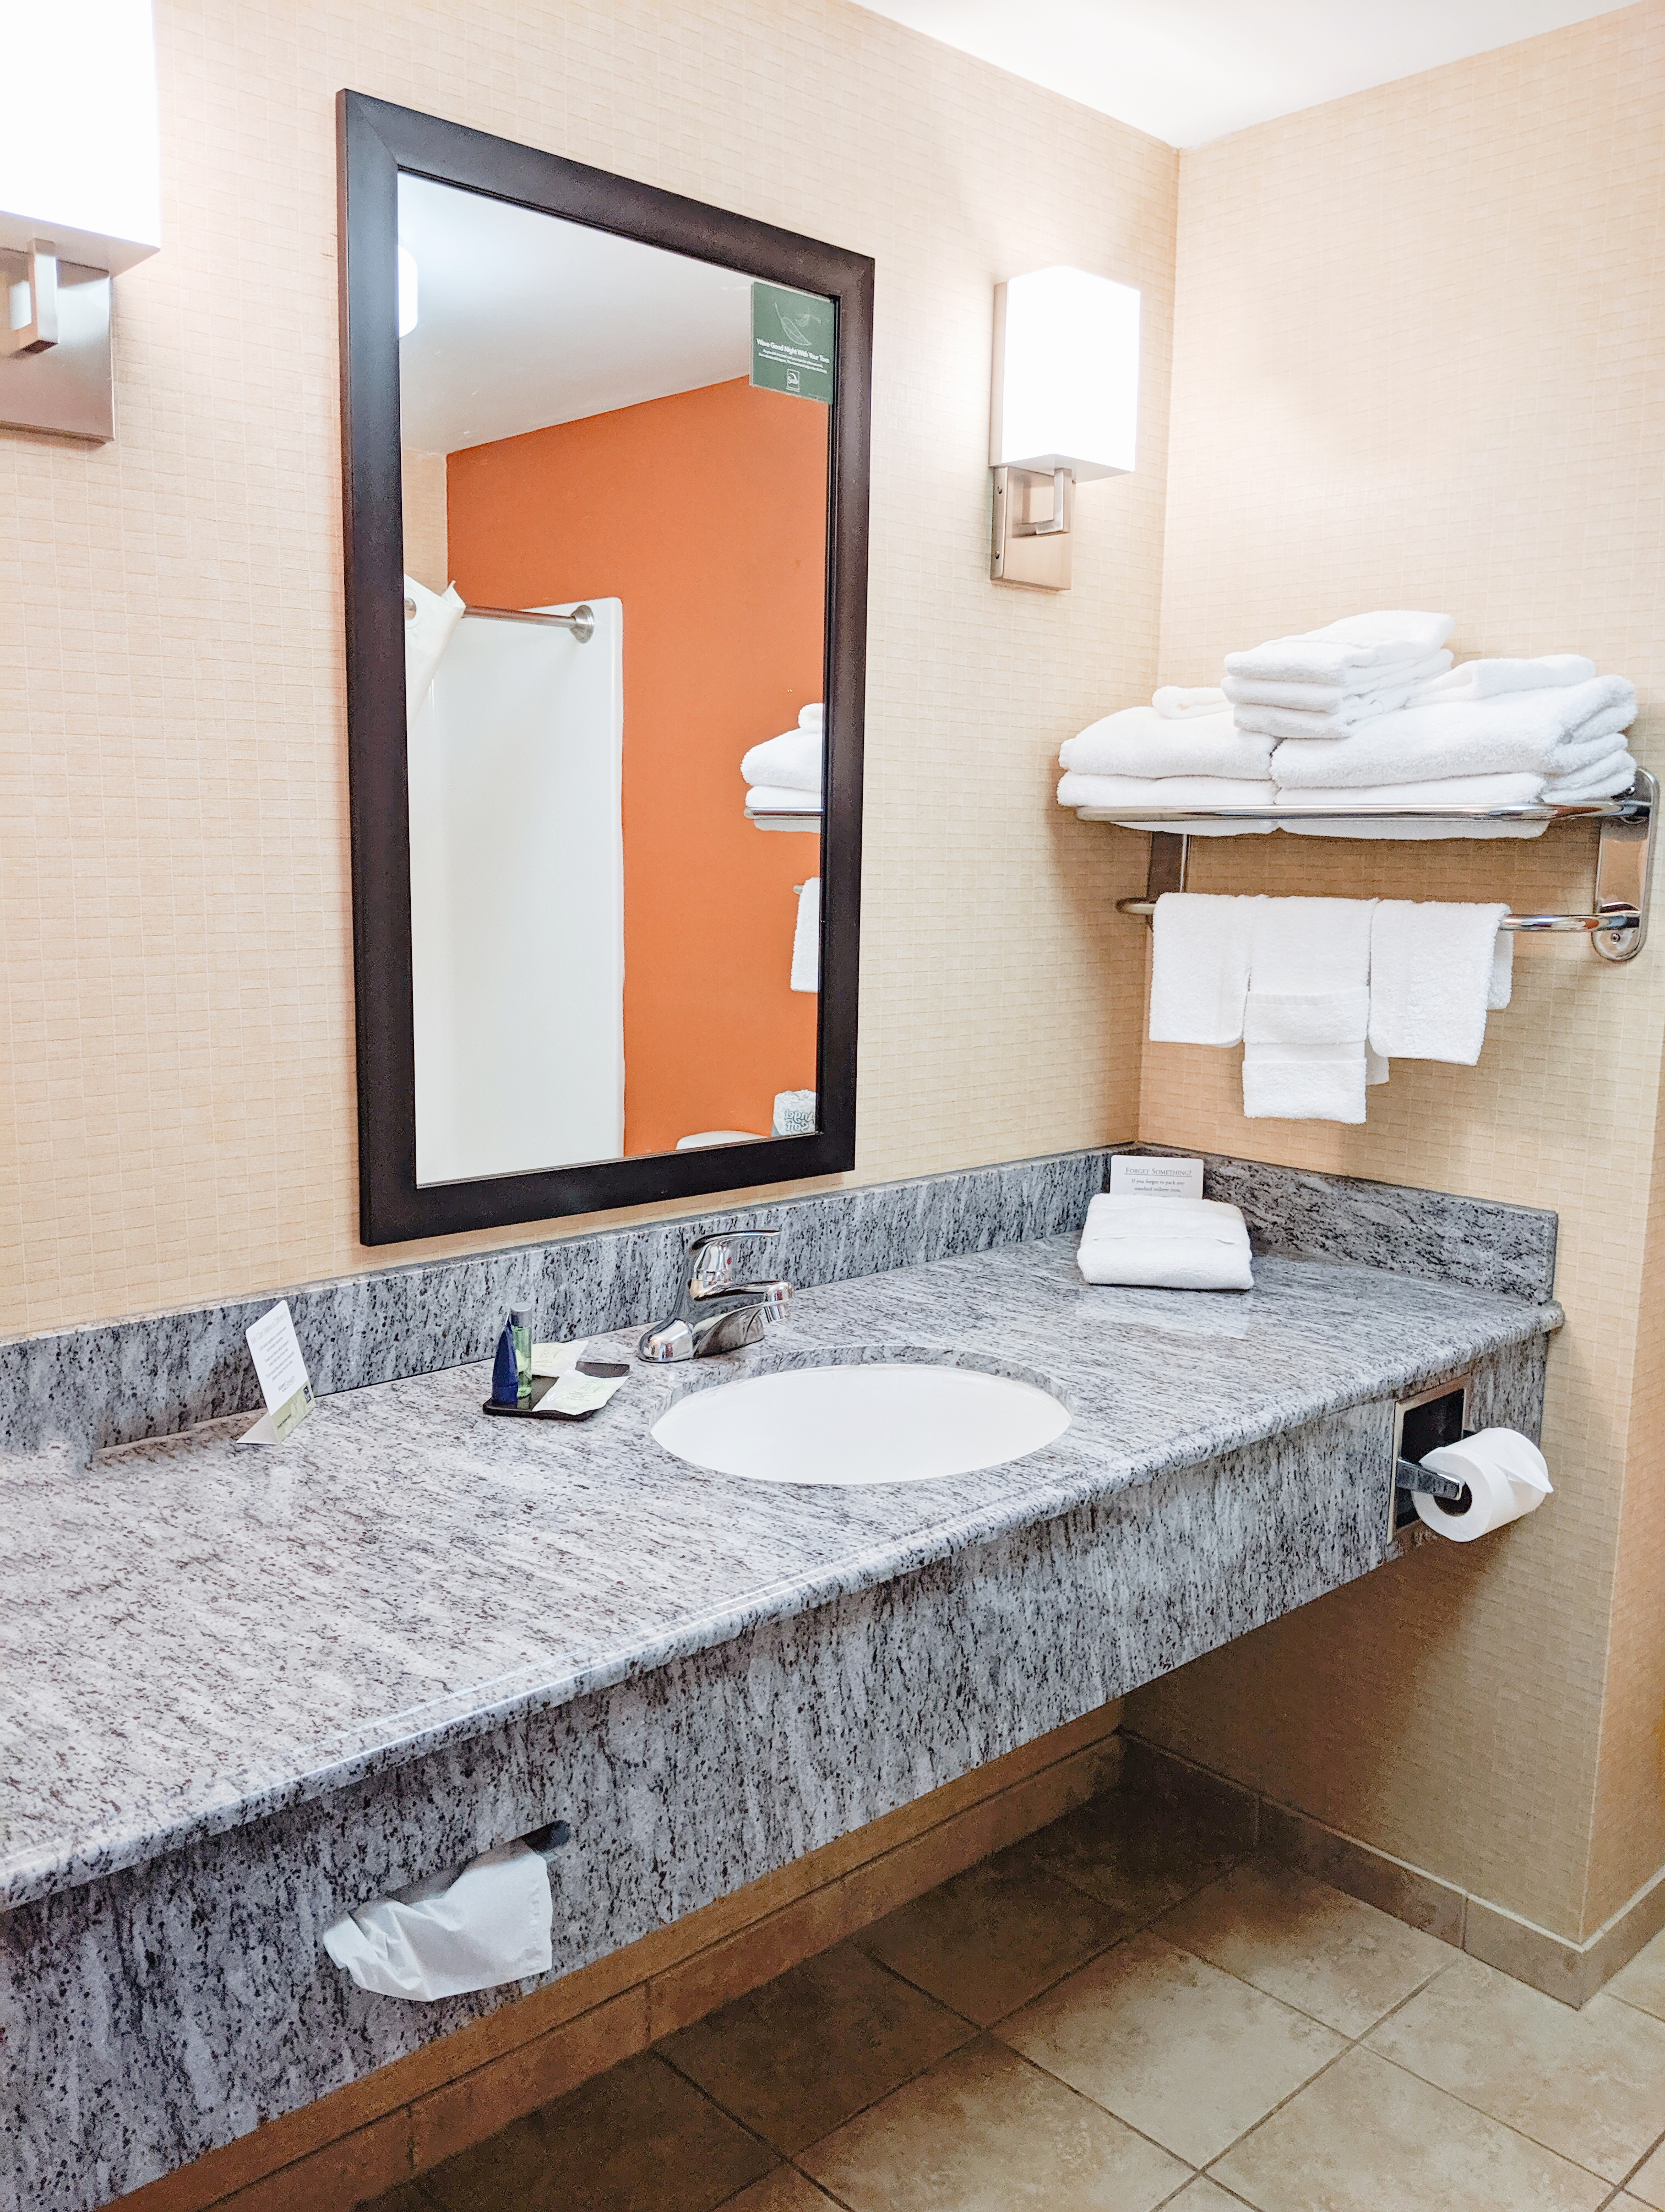 Sleep Inn Dyersburg TN Review - Dyersburg TN Hotels: Detailed Sleep Inn Dyersburg TN reviews with 15 photos and updated information as of fall 2019. Find out why Sleep Inn is one of the best hotels in Dyersburg, TN in this Dyersburg TN Travel Guide. (ad) #madeintn #dyersburg #dyersburgtn #tennessee 